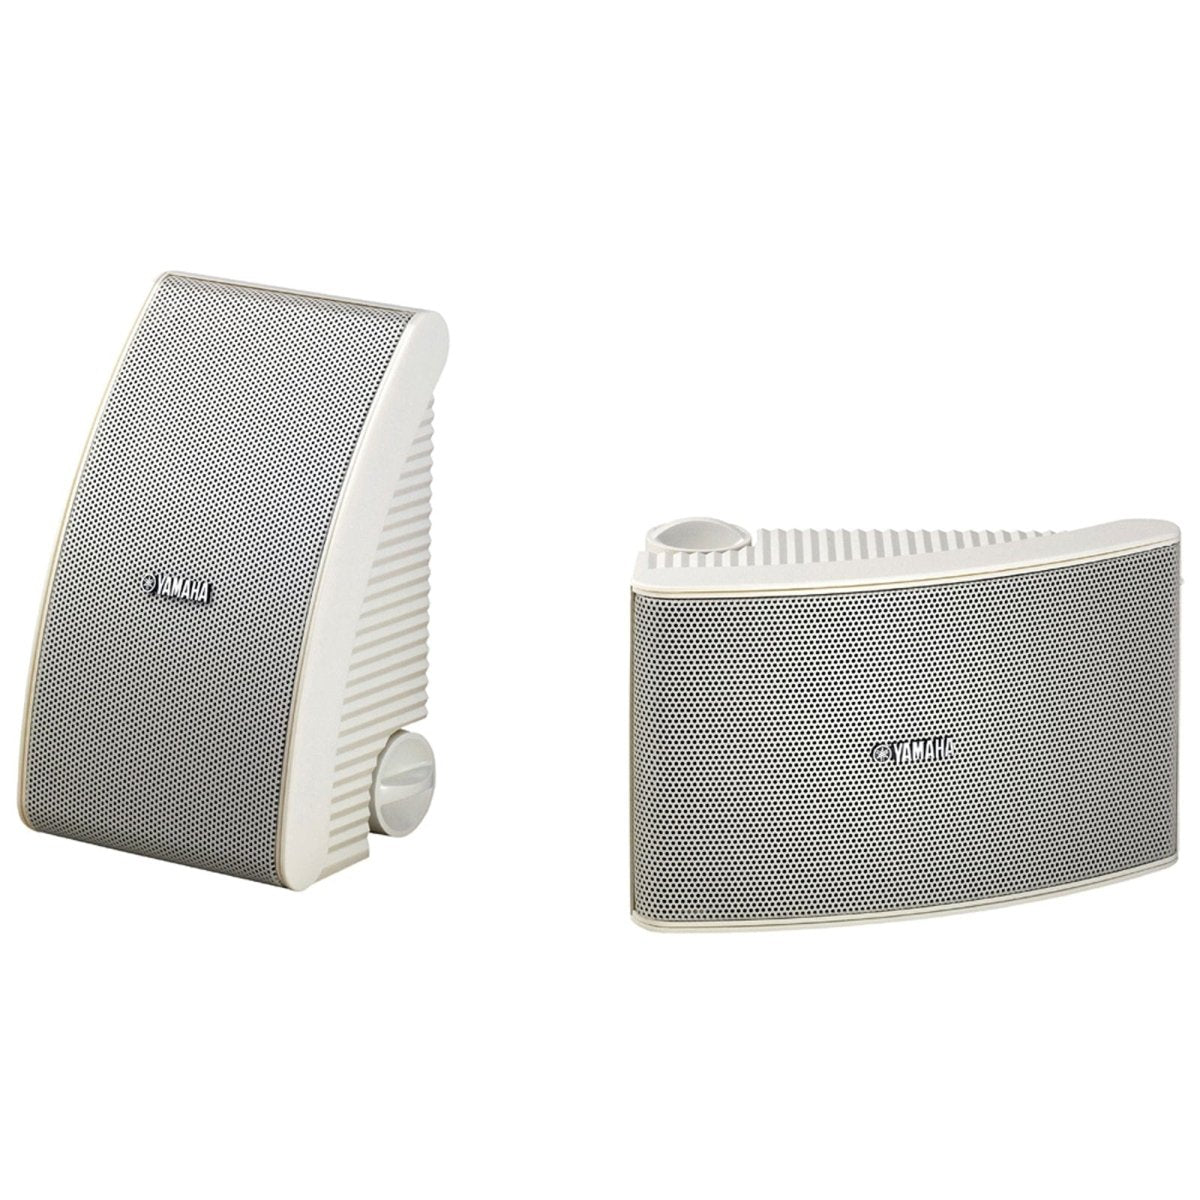 Yamaha NSAW592 150W All-Weather Outdoor Speakers (Pair) - White | Atlantic Electrics